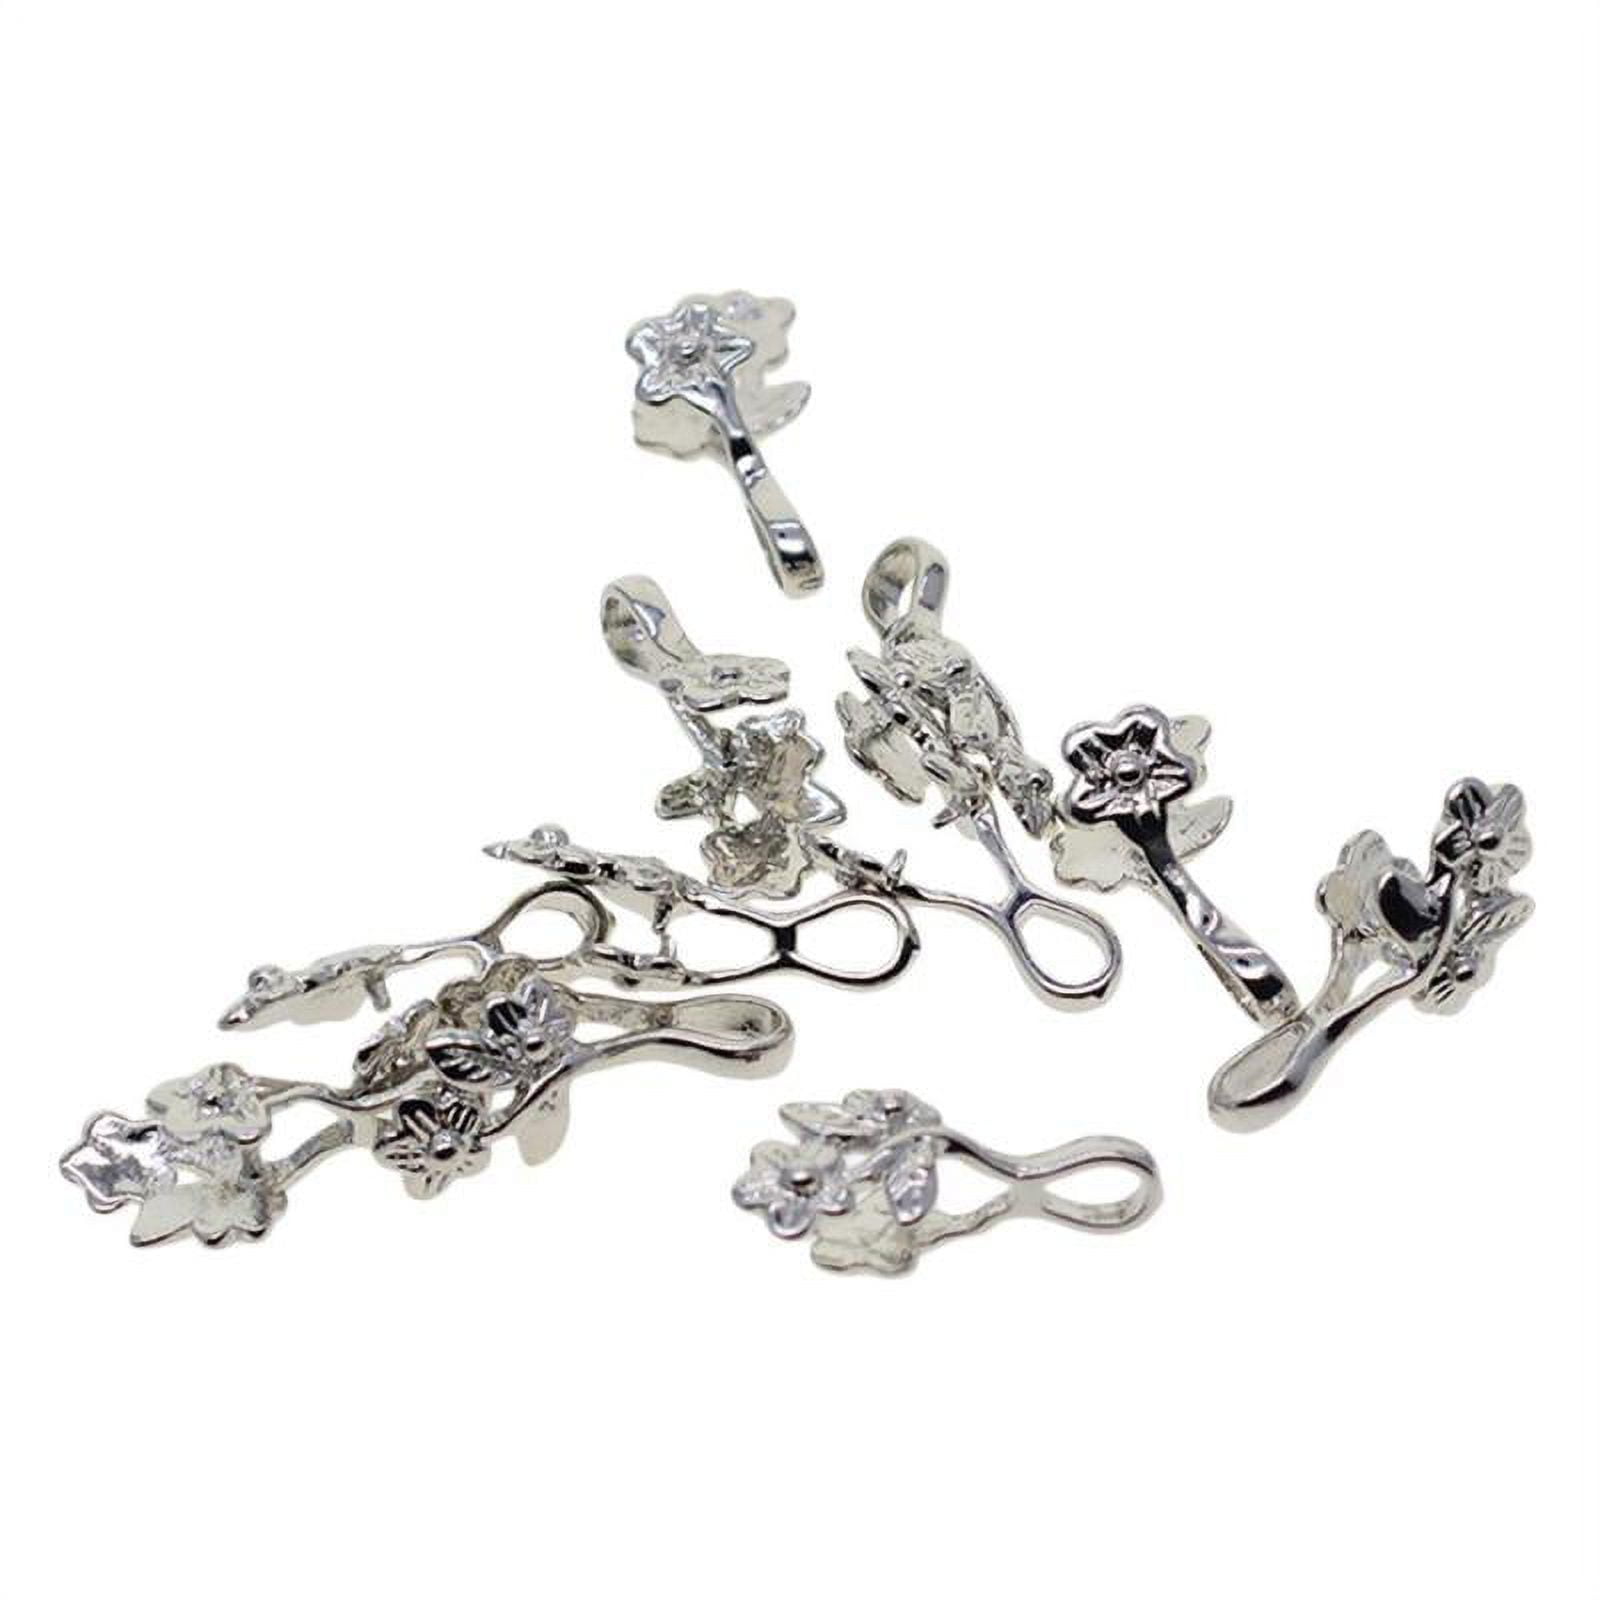 96Pcs Necklace Clasp Magnetic Jewelry Locking Clasps And Closures Bracelet  Extender For Necklaces, (Silver & Gold)